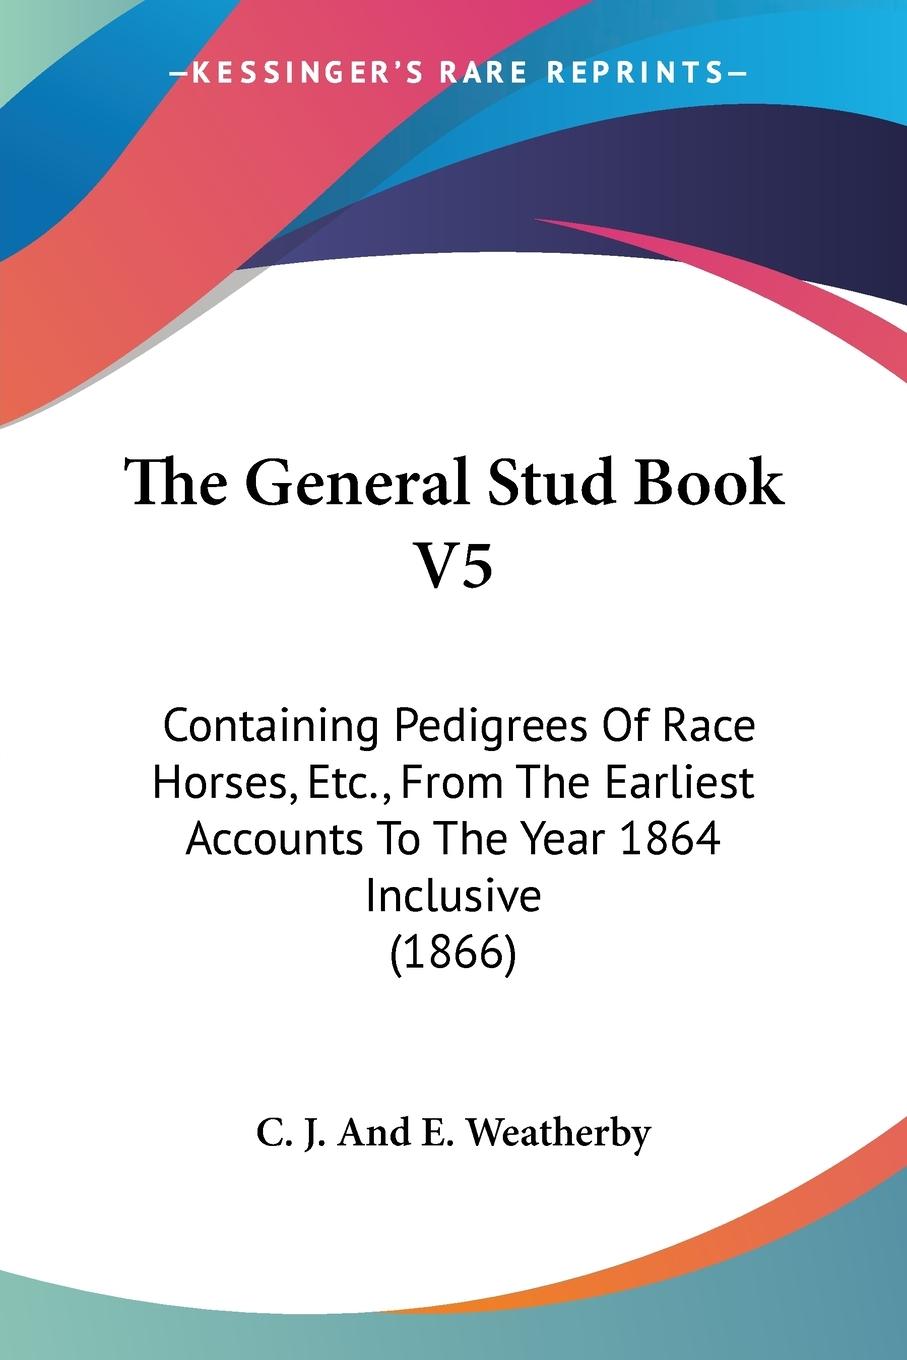 The General Stud Book V5 - C. J. And E. Weatherby